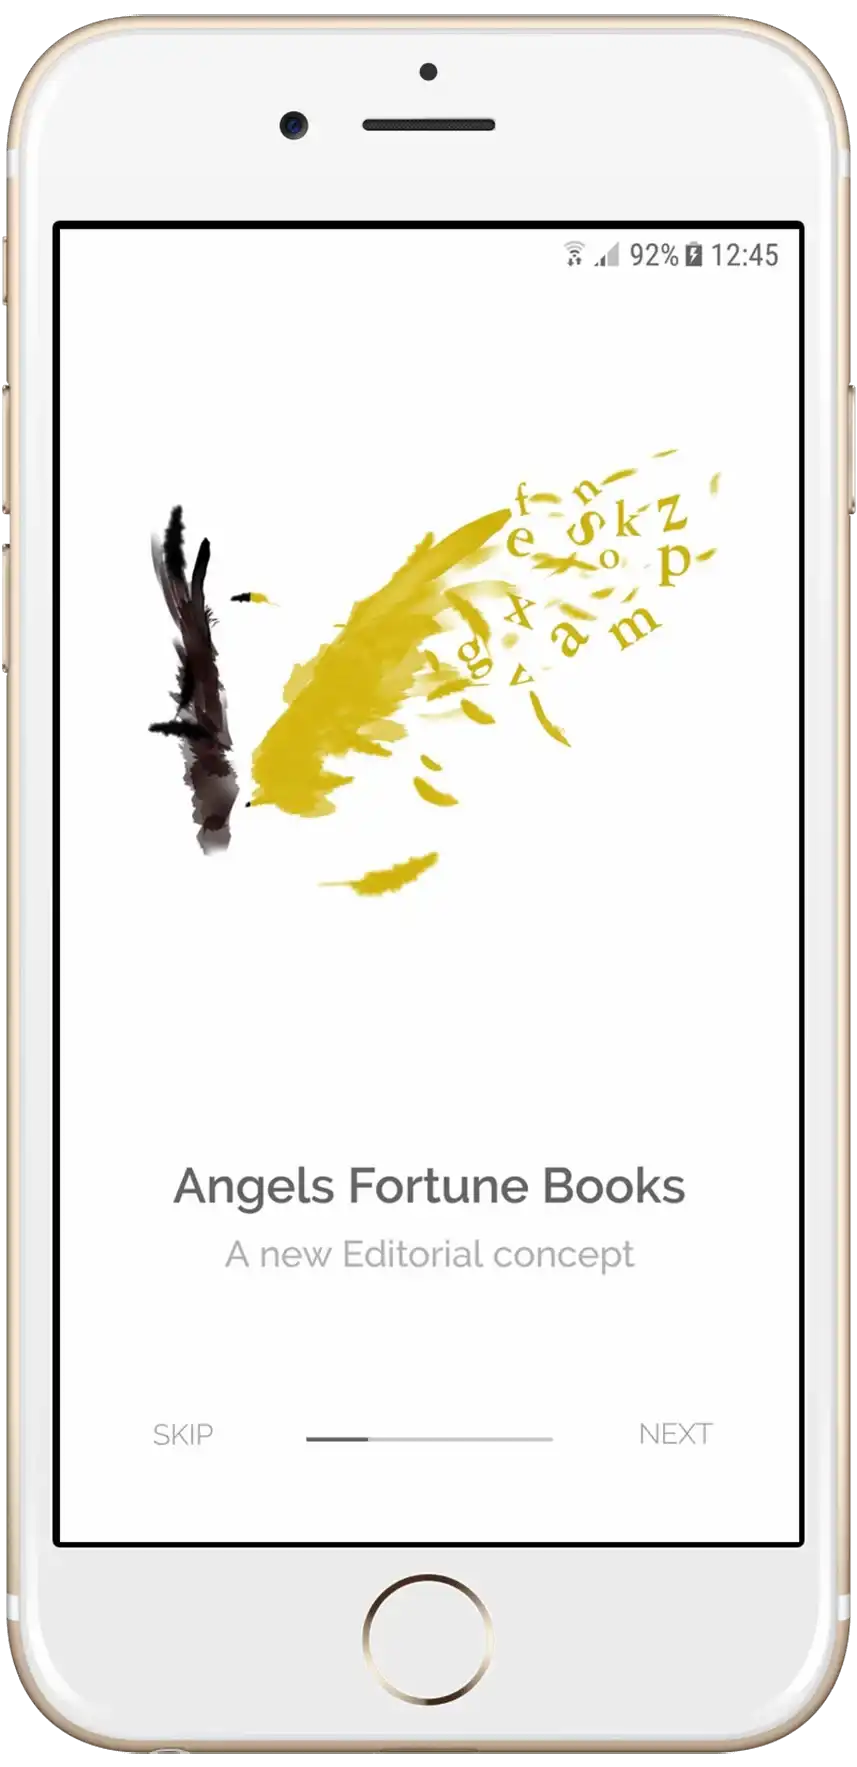 ANGELS FORTUNE BOOKS